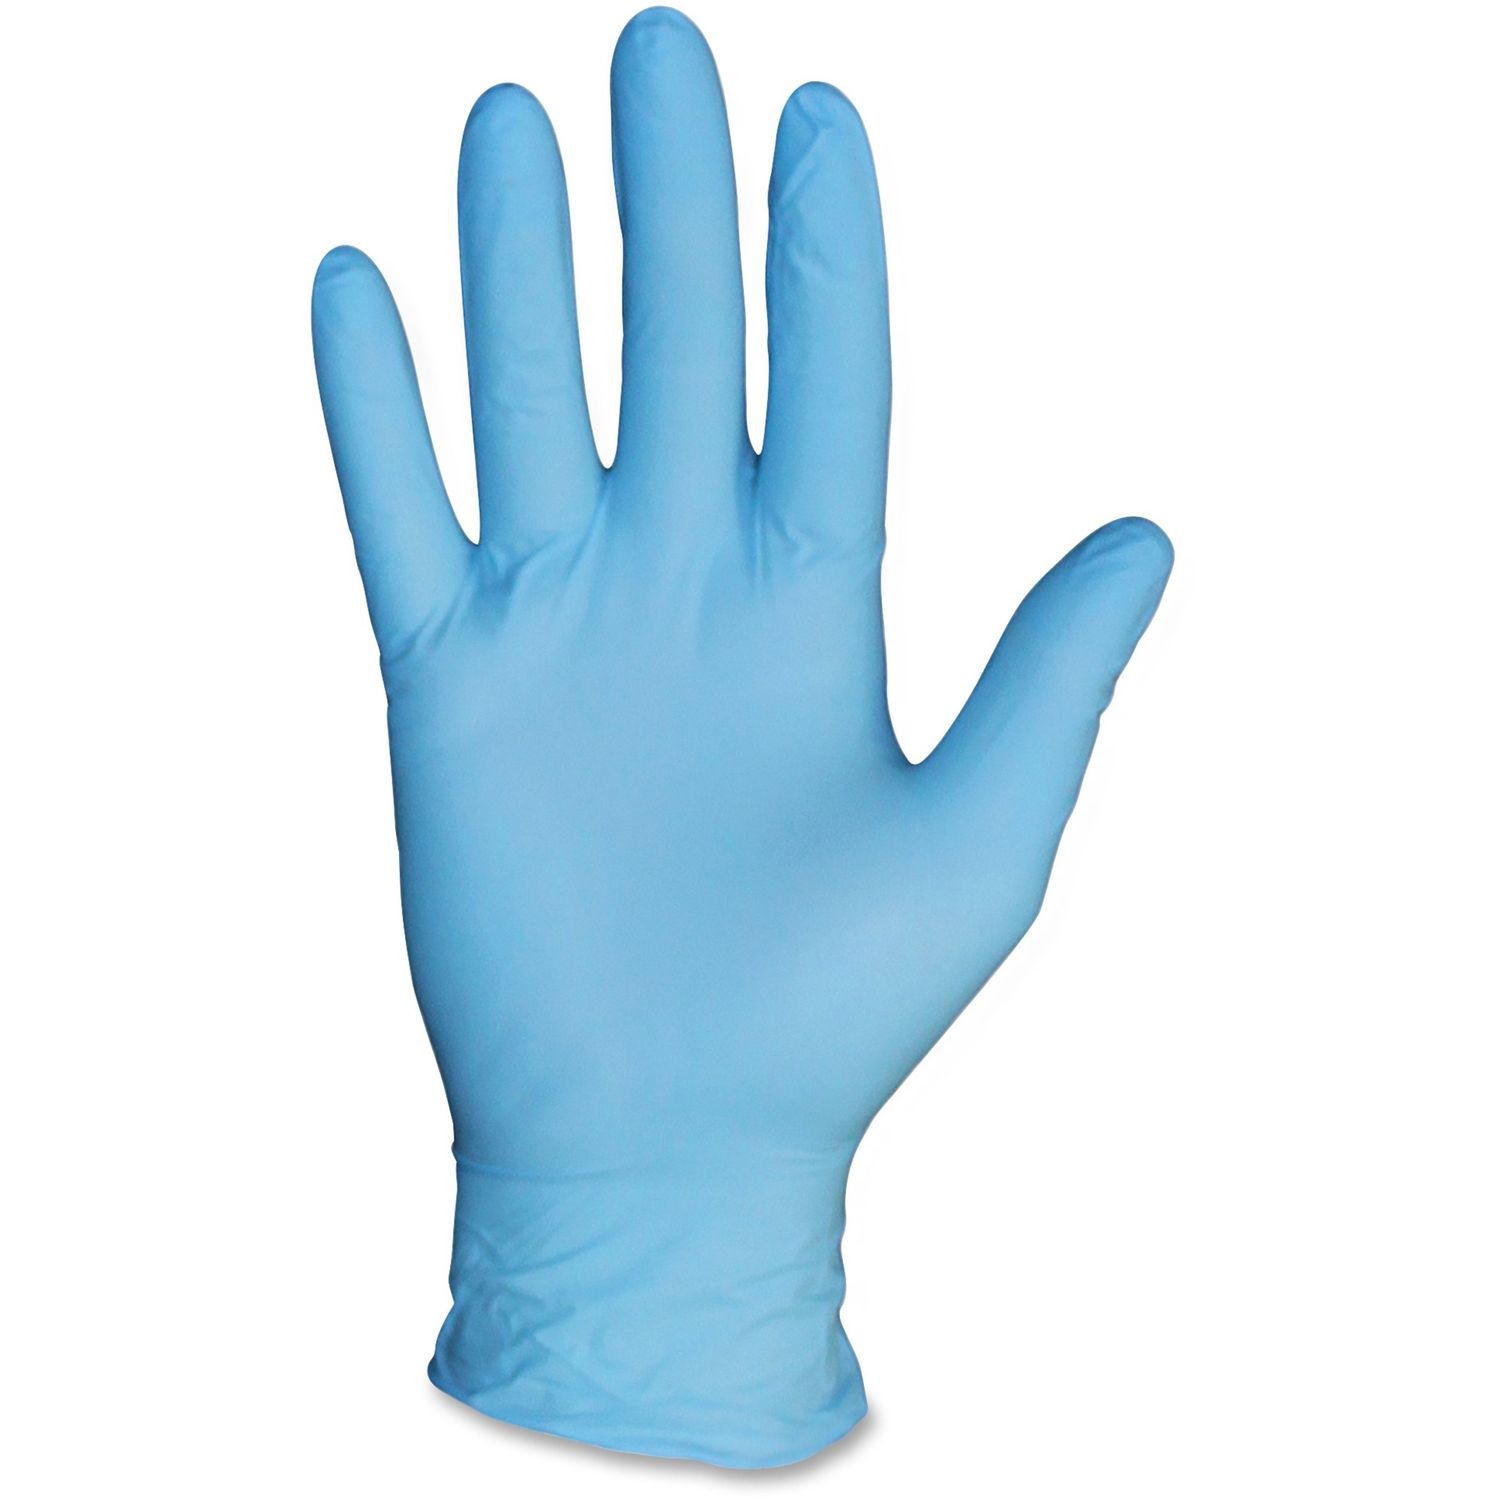 PF General Purpose Nitrile Gloves Small Size, Nitrile, Blue, Powder-free, Ambidextrous, Beaded Cuff, Disposable, For Construction, Chemical, Multipurpose, Cleaning, Food, Laboratory Application